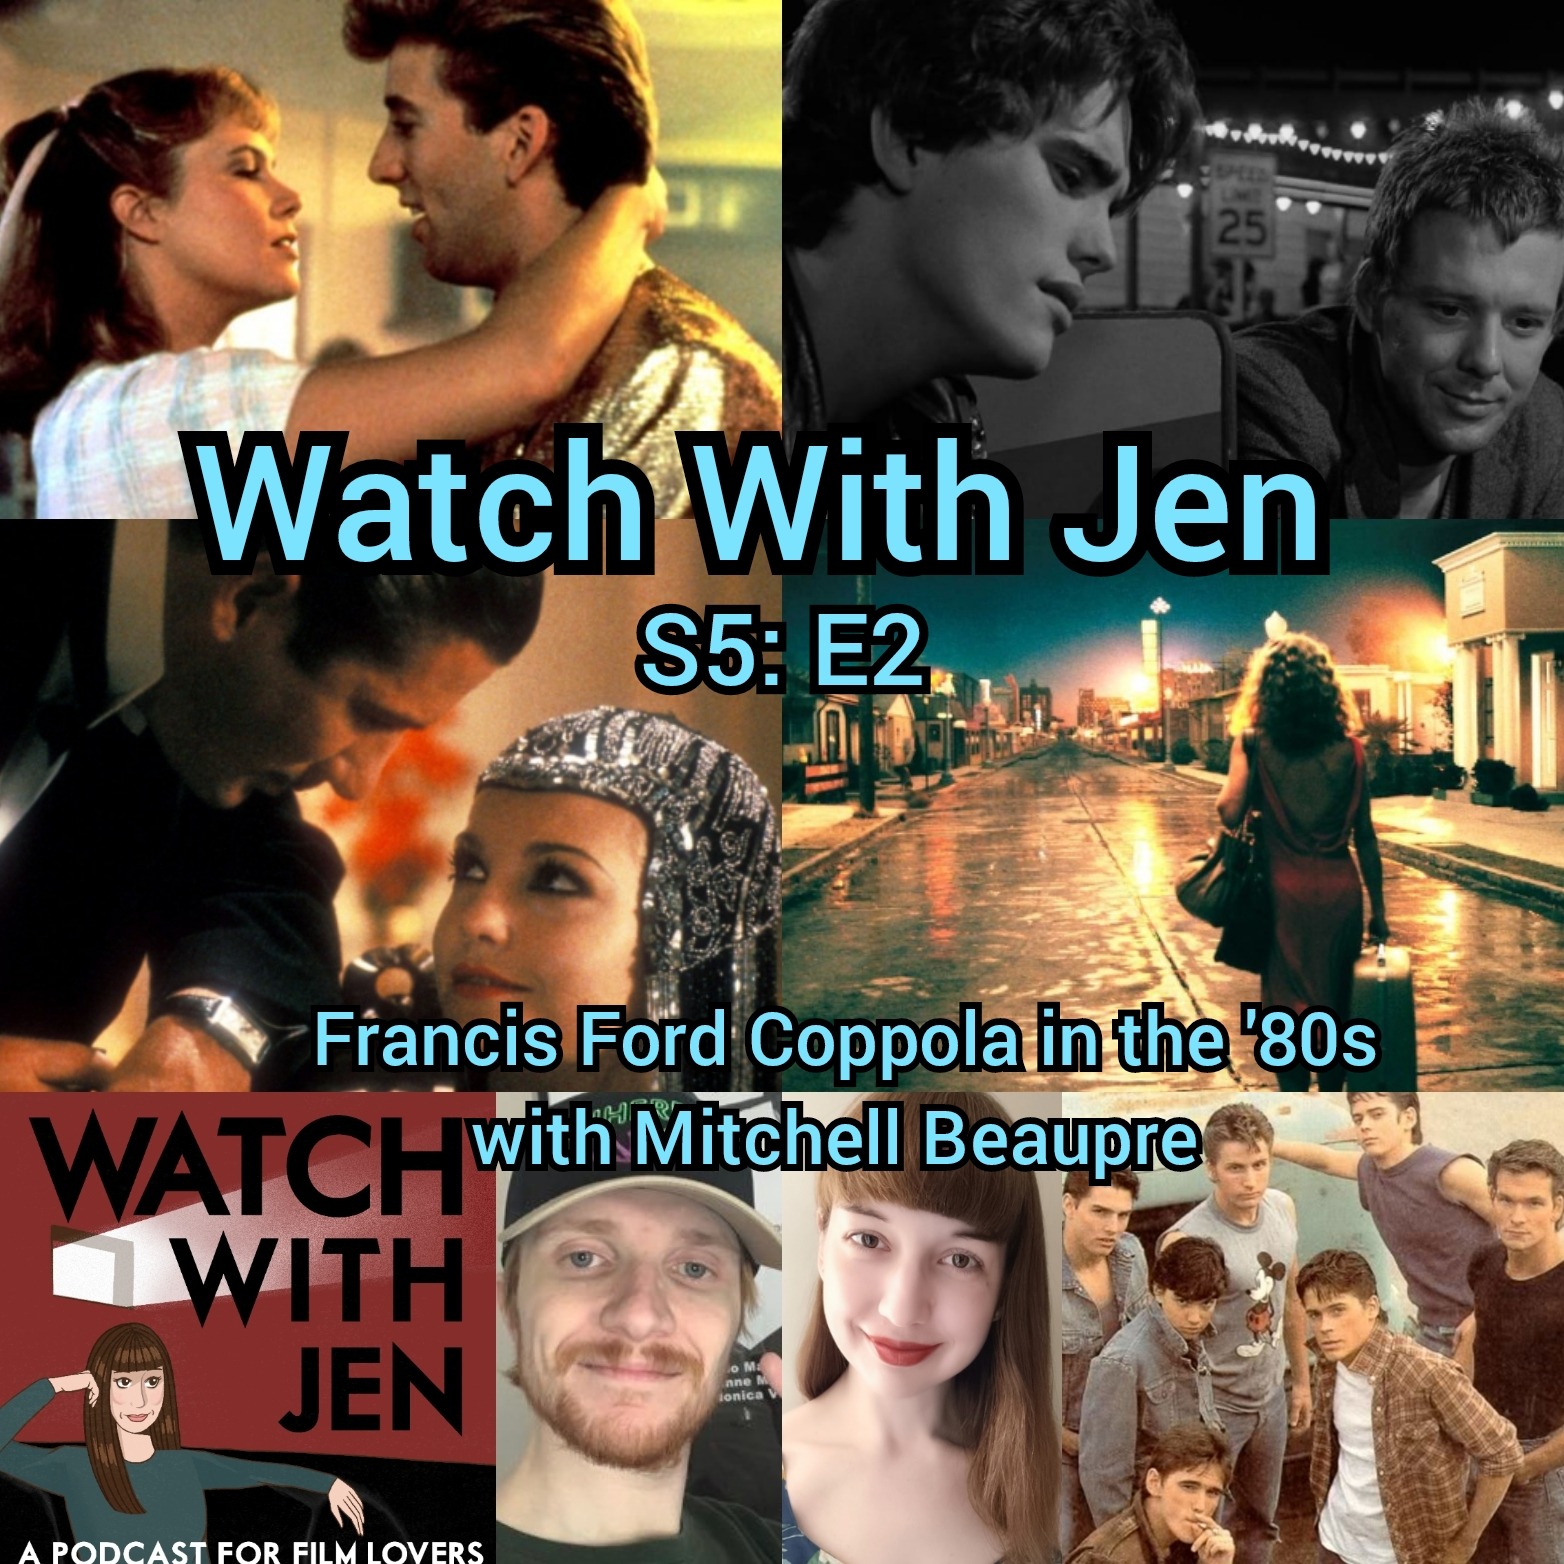 Watch With Jen - S5: E2 - Francis Ford Coppola in the ’80s with Mitchell Beaupre